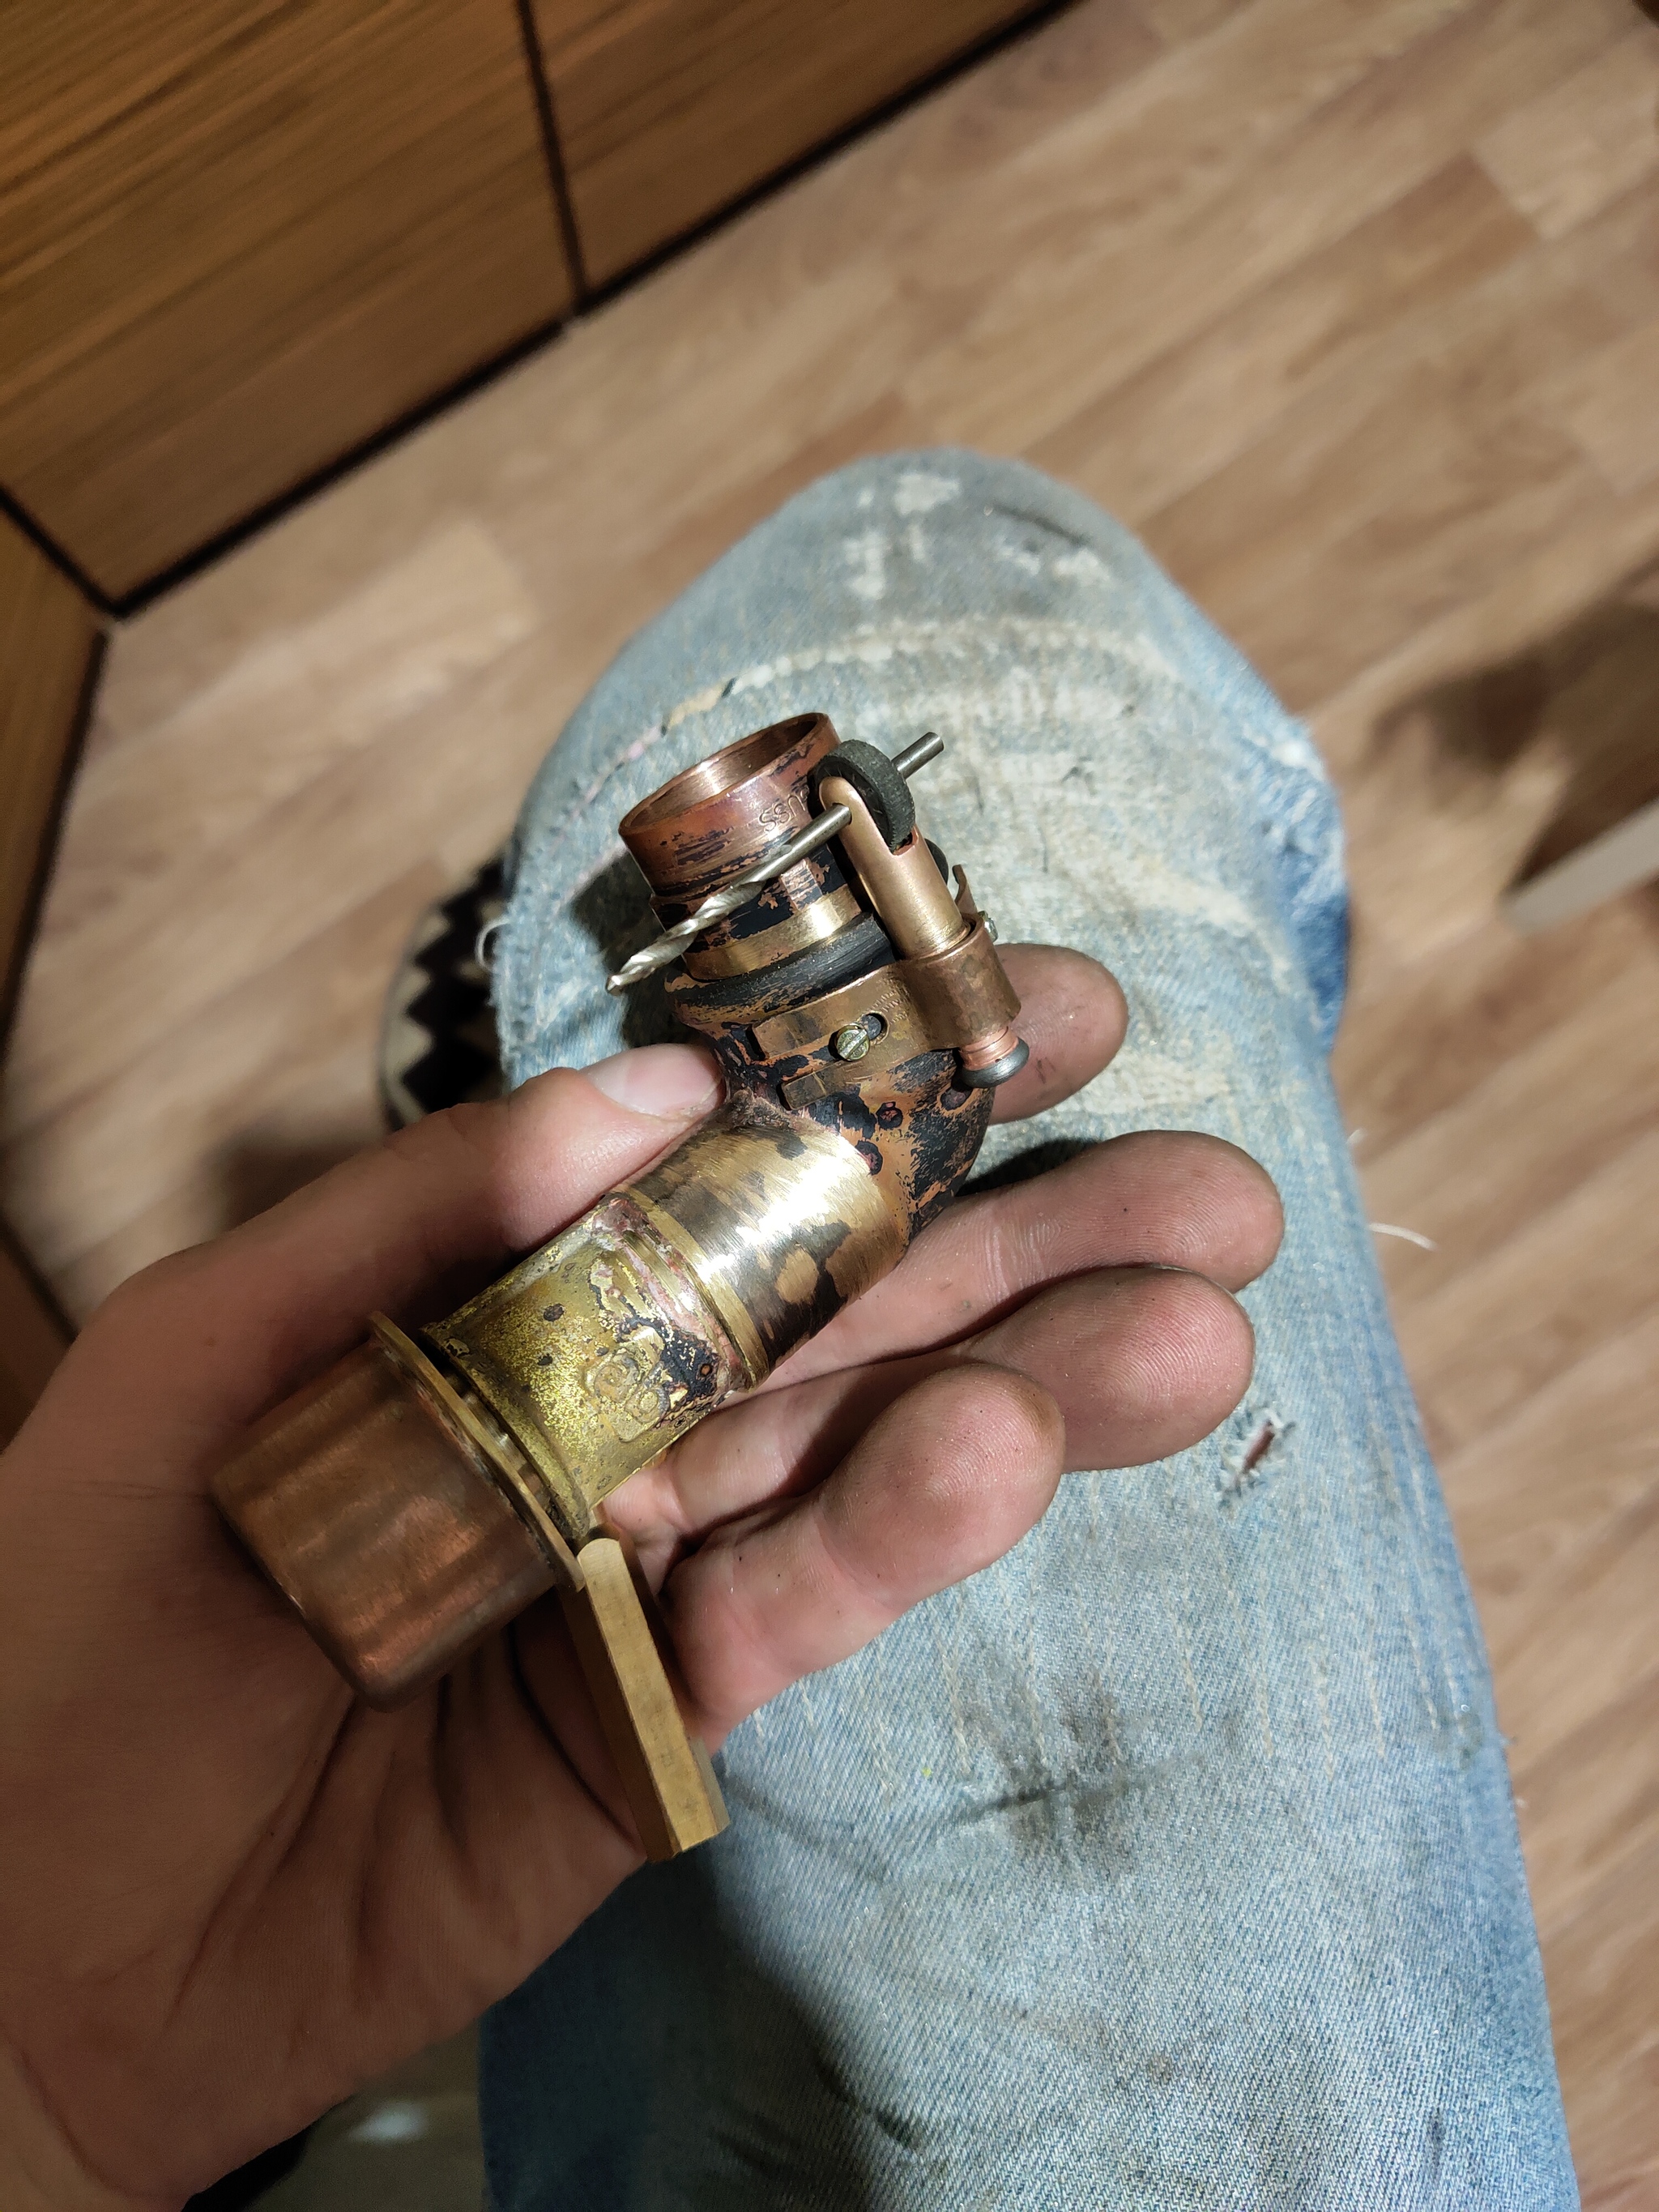 Gasoline lighter Donqwer-2 - My, Gas lighter, Homemade, Steampunk lighter, Lighter, Copper, Steampunk, Patina, Longpost, Needlework with process